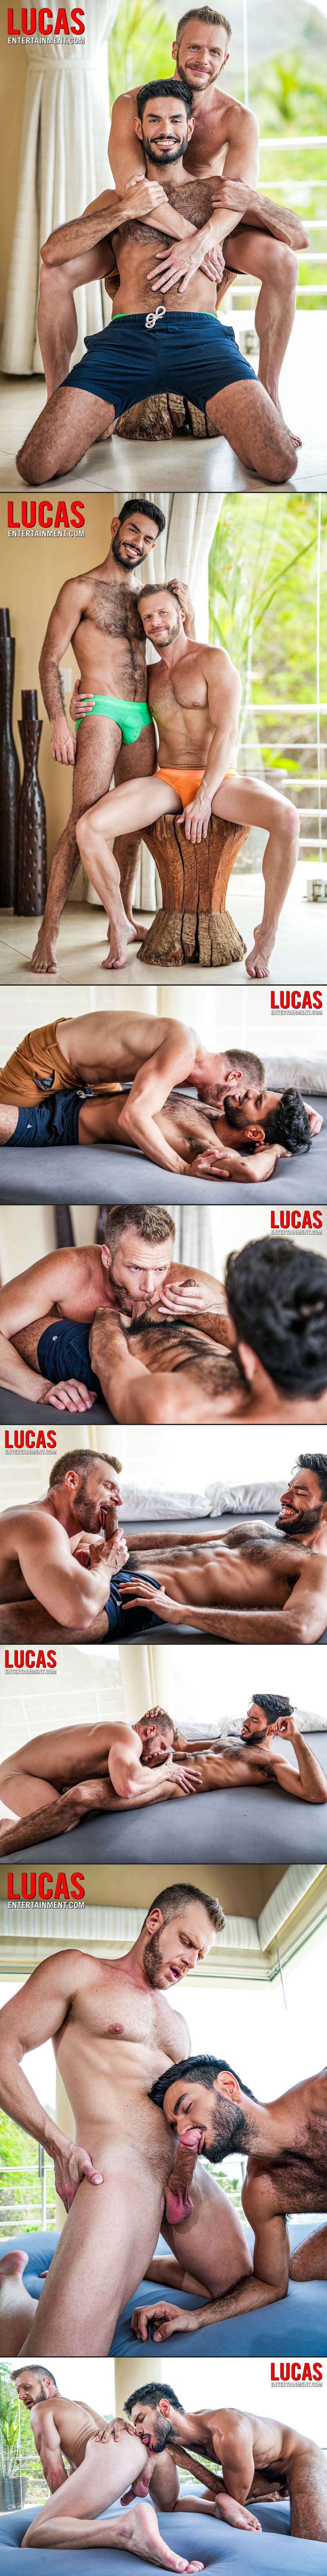 Unzipped And Unleashed, Scene 3 (Nico Zetta Pounds Brian Bonds Deep And Hard) at LucasEntertainment